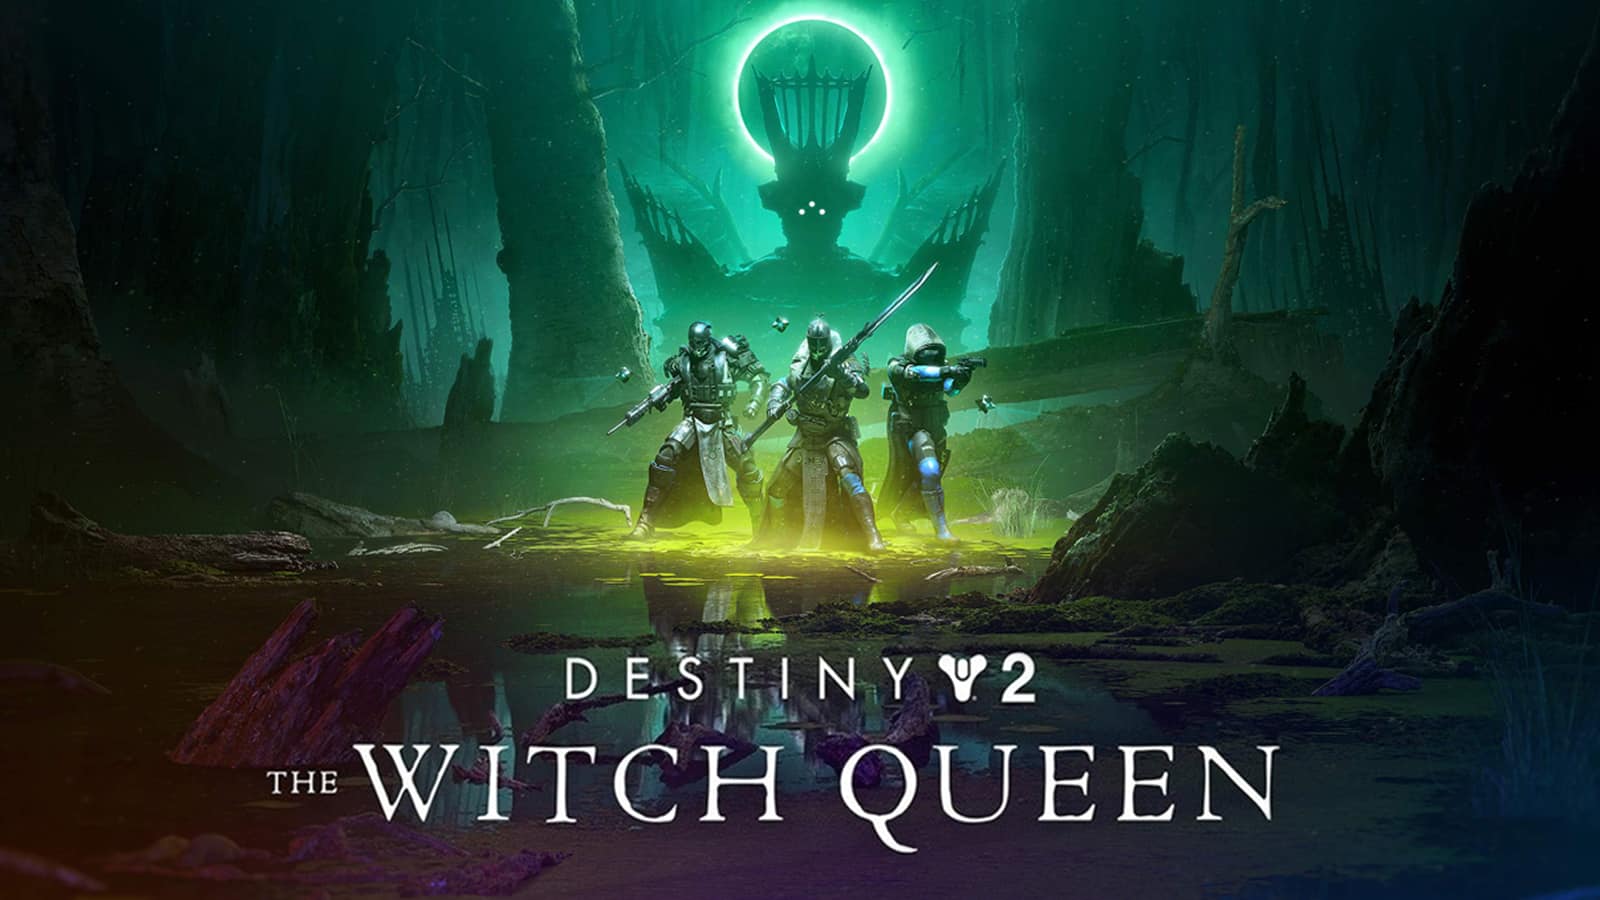 Destiny 2 The Witch Queen Expansion Date Date Savathun Story Trailer изтича повече